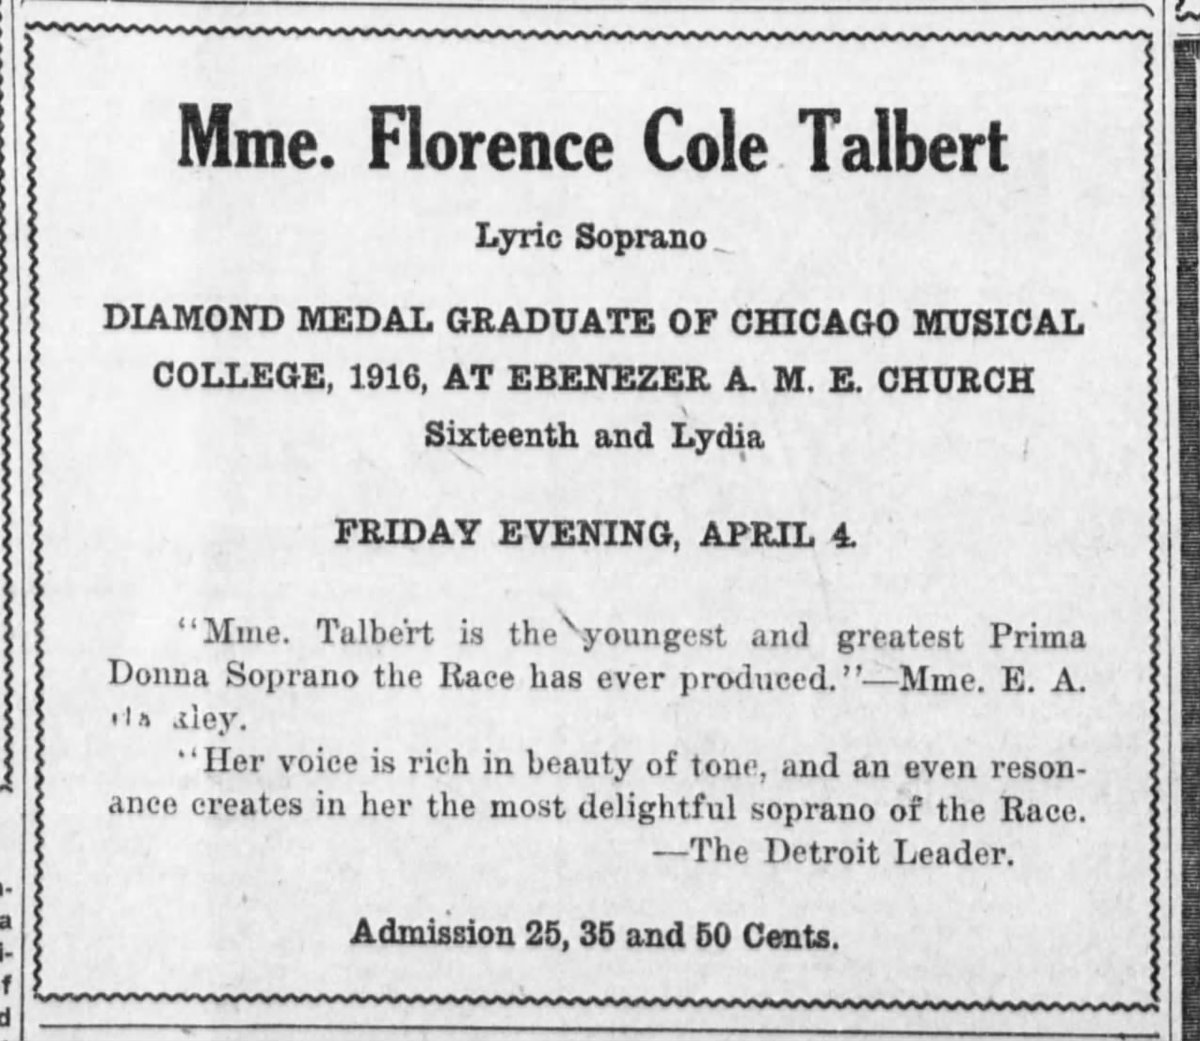 Before the Chicago Musical College moved out, though, they enrolled future opera star Florence Cole Talbert in 1916. The first Black singer to perform here, she was also awarded the school's "Diamond Medal".(no clue what that actually means tbh but impressive regardless) 4/11